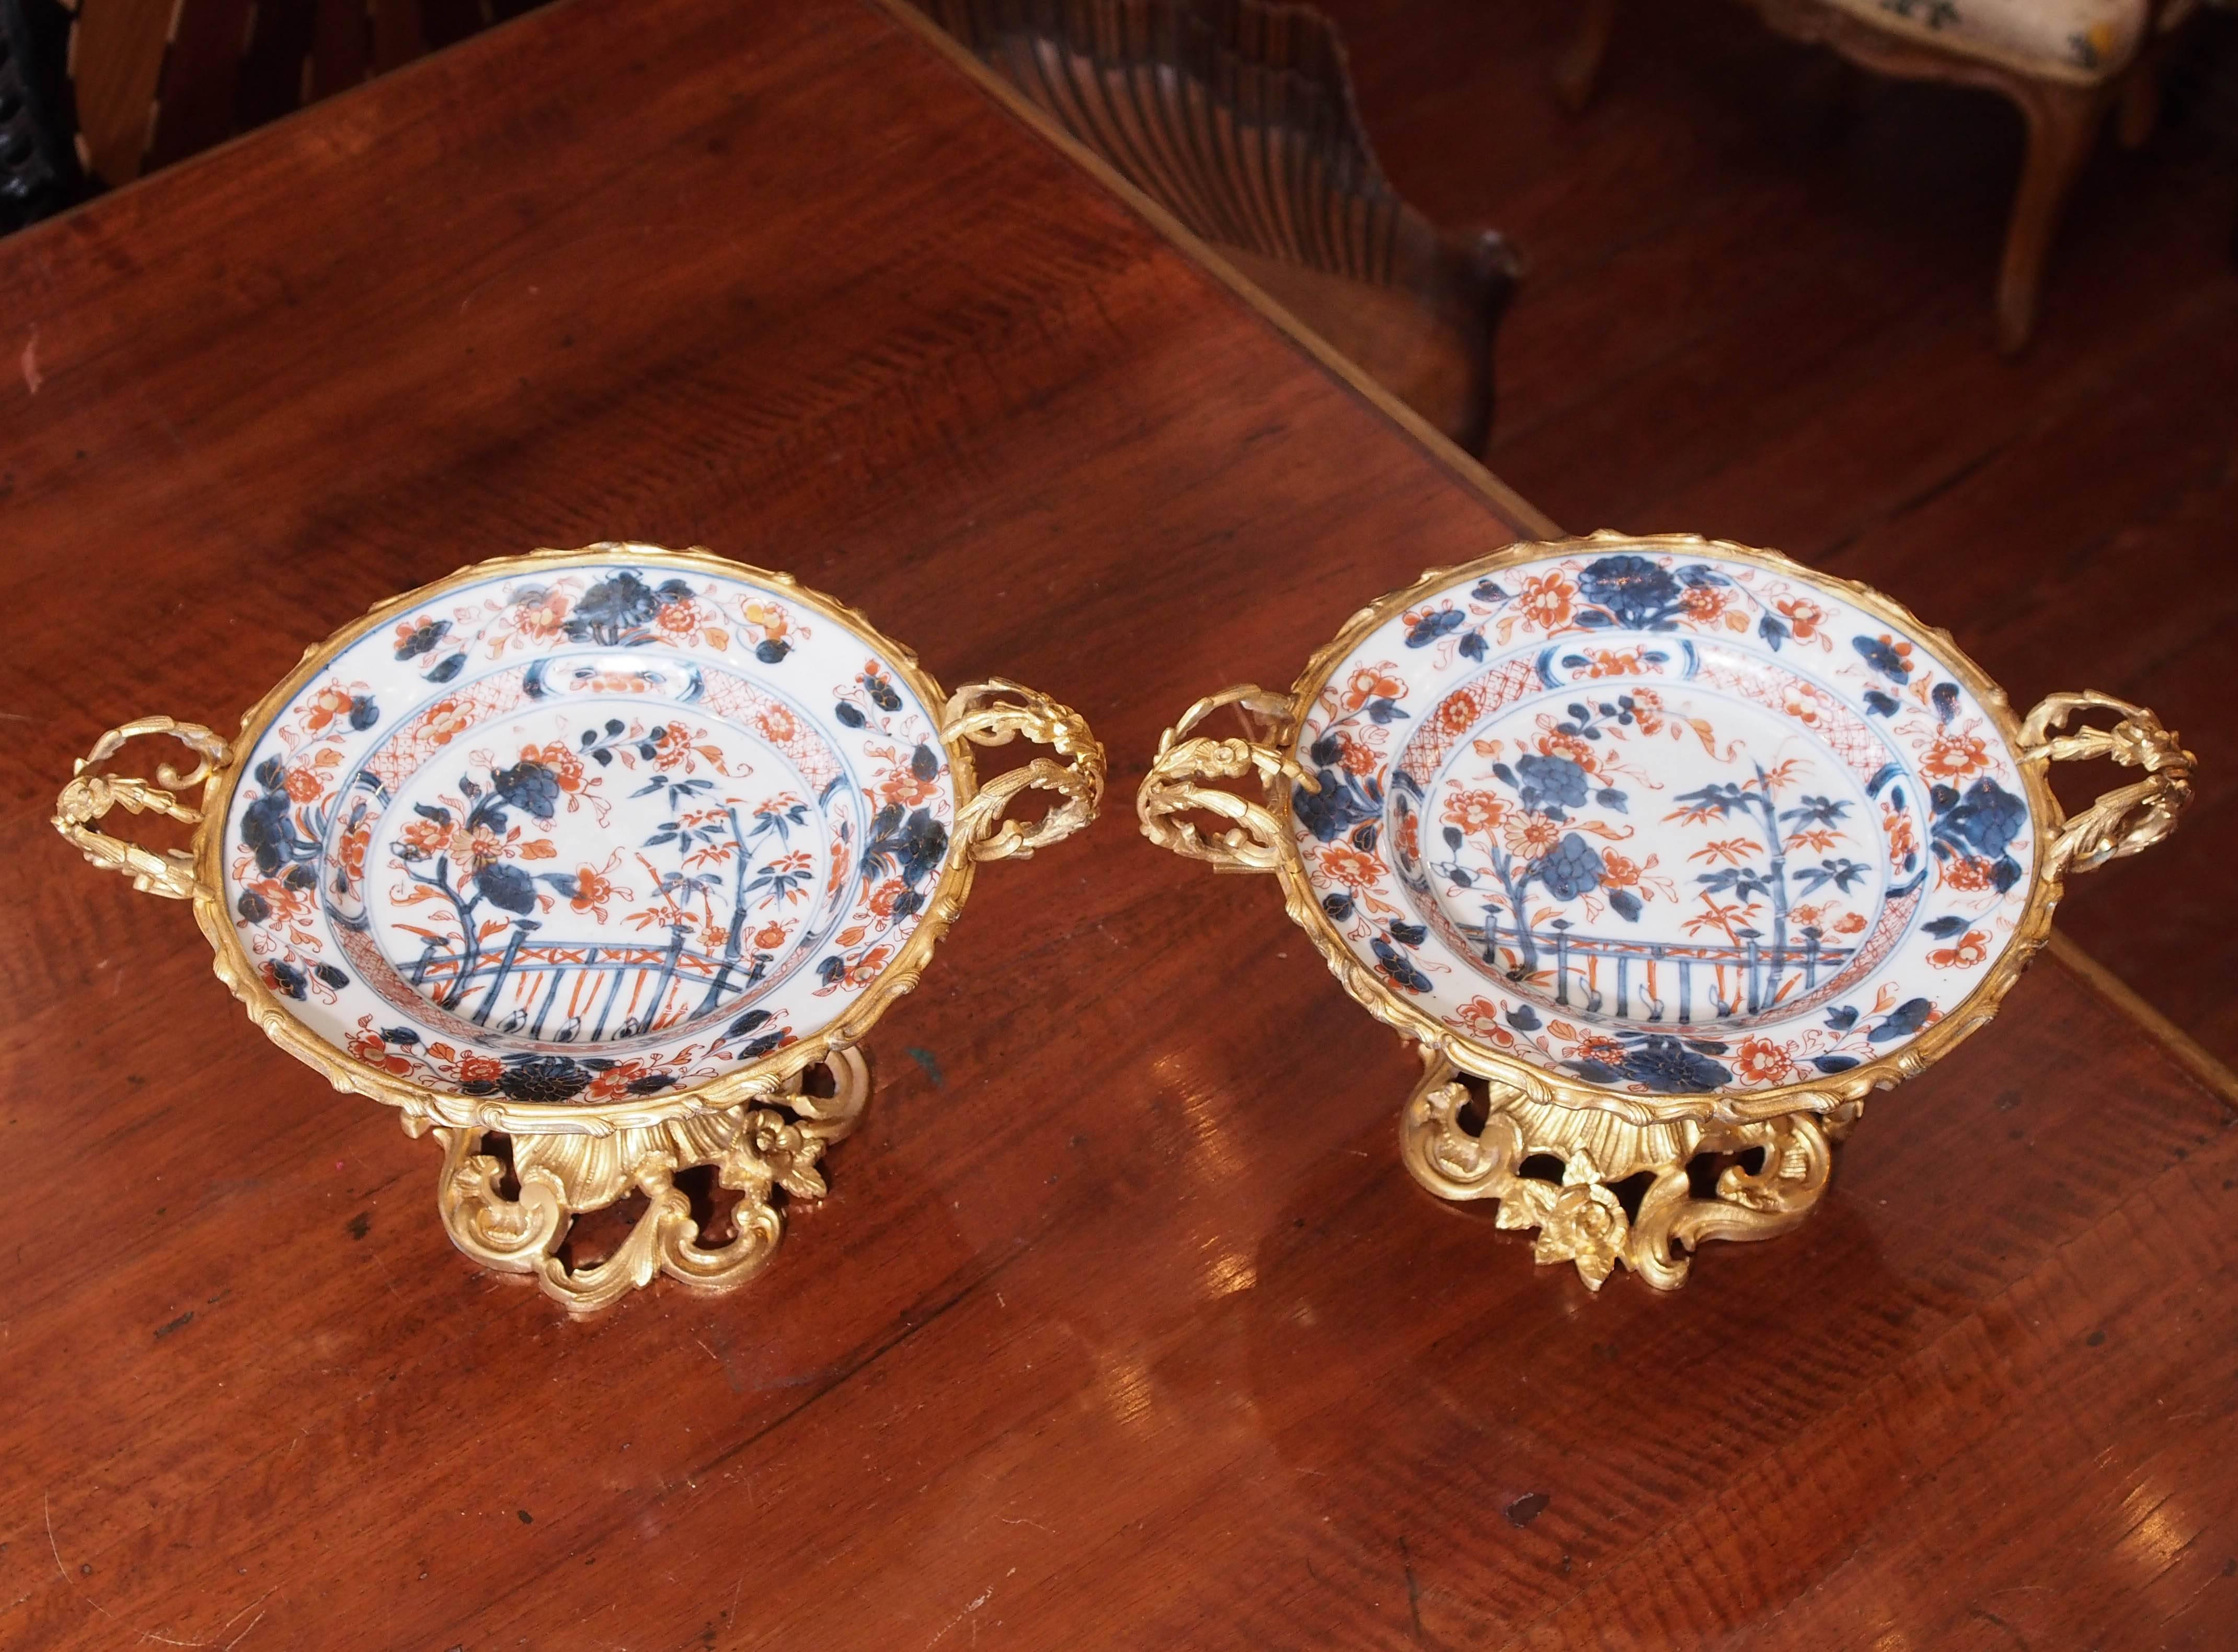 Pair of French gilt bronze-mounted Japanese Imari plates having foliate mounting. Mounts are 19th century and plates are 18th century.